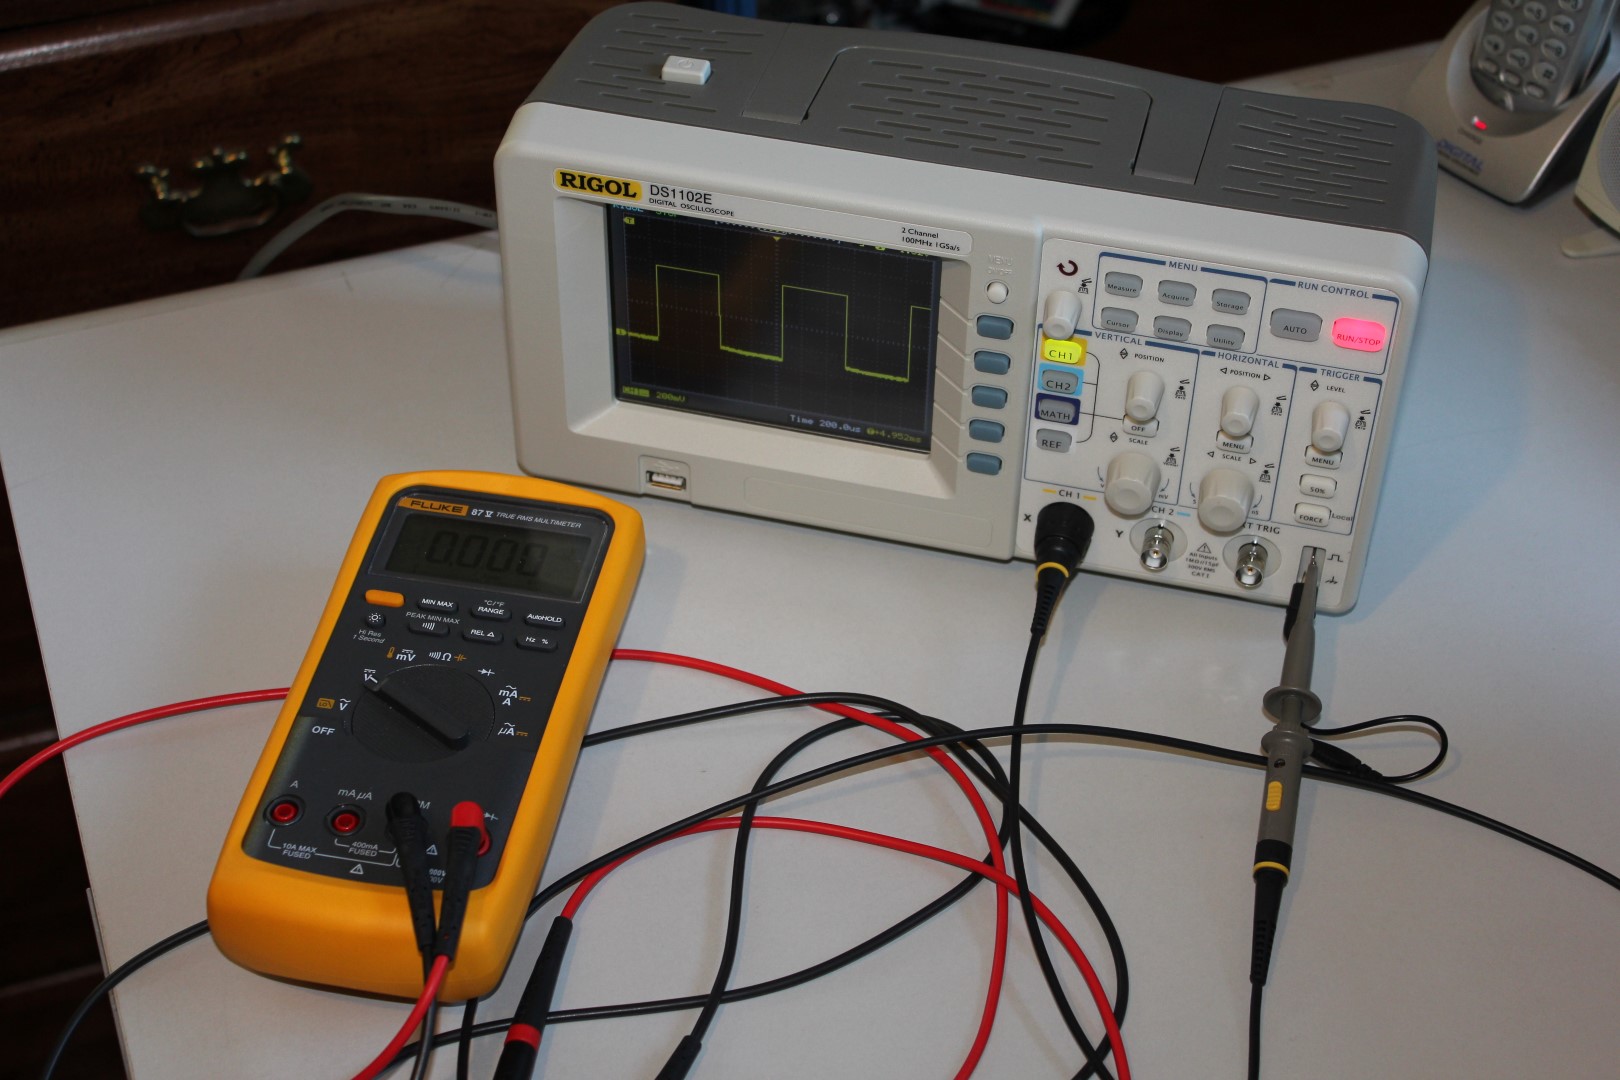 Necessary instruments: an oscilloscope and a good multimeter